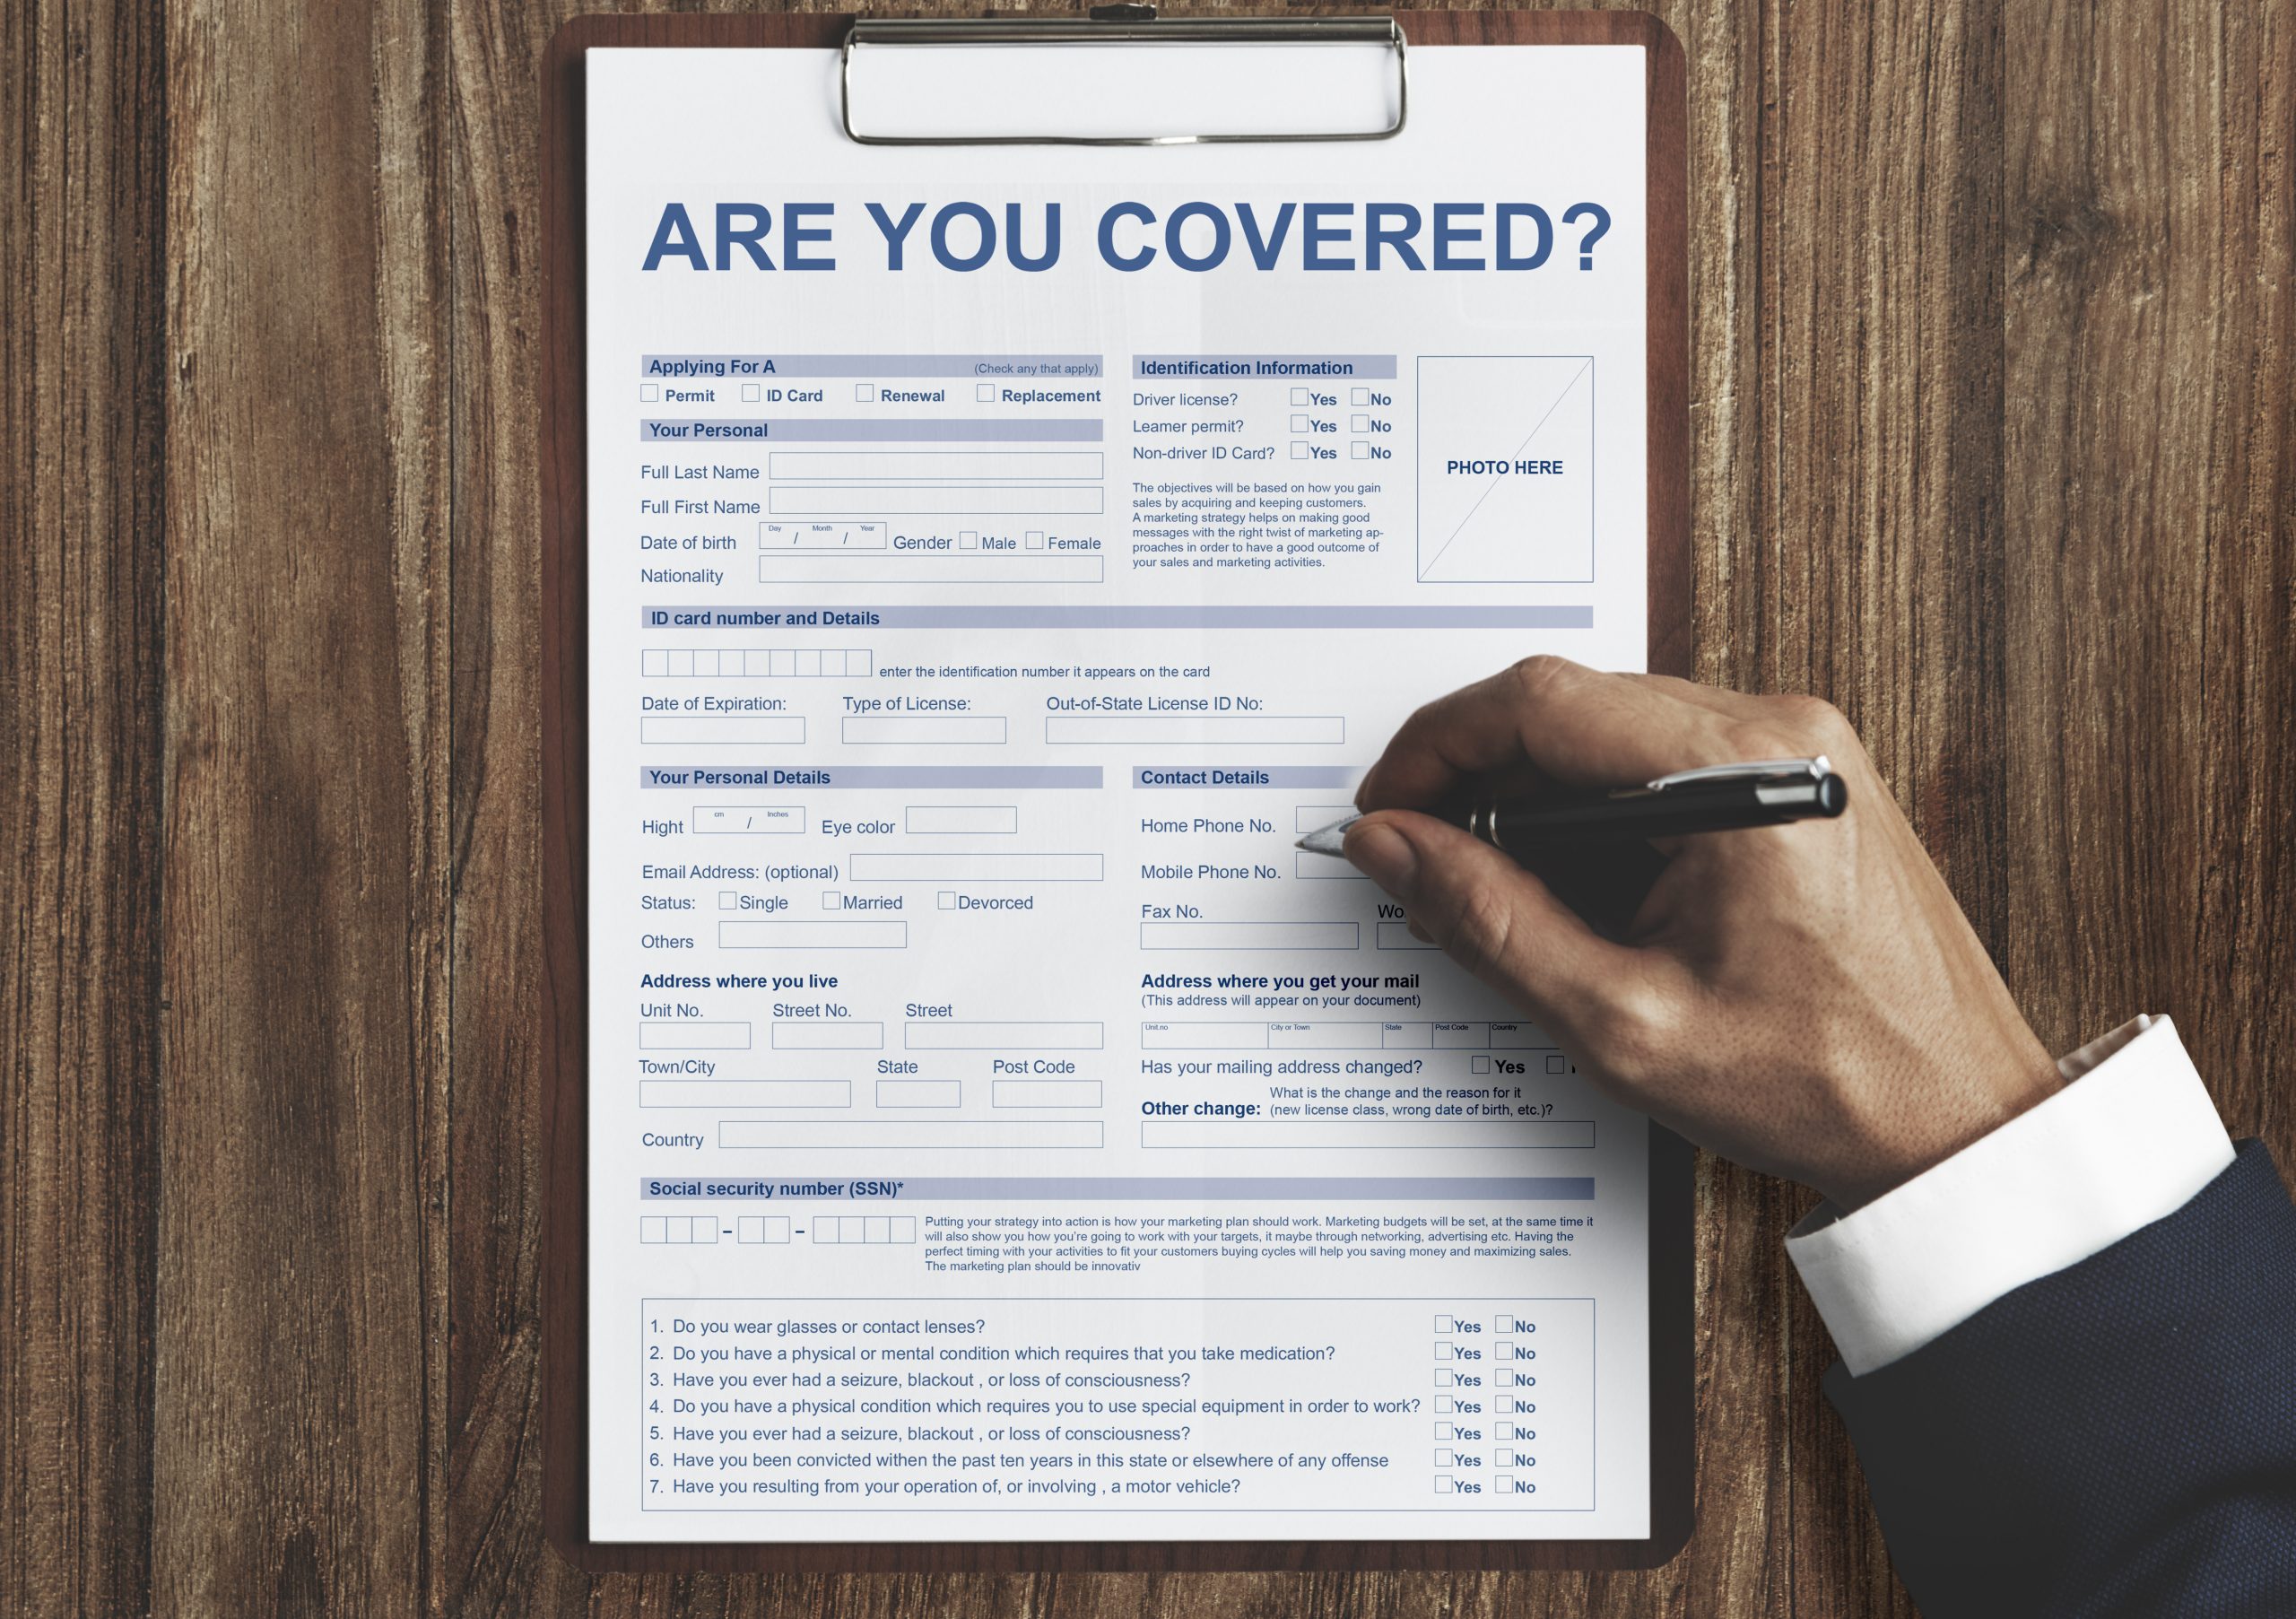 Are You Covered health insurance